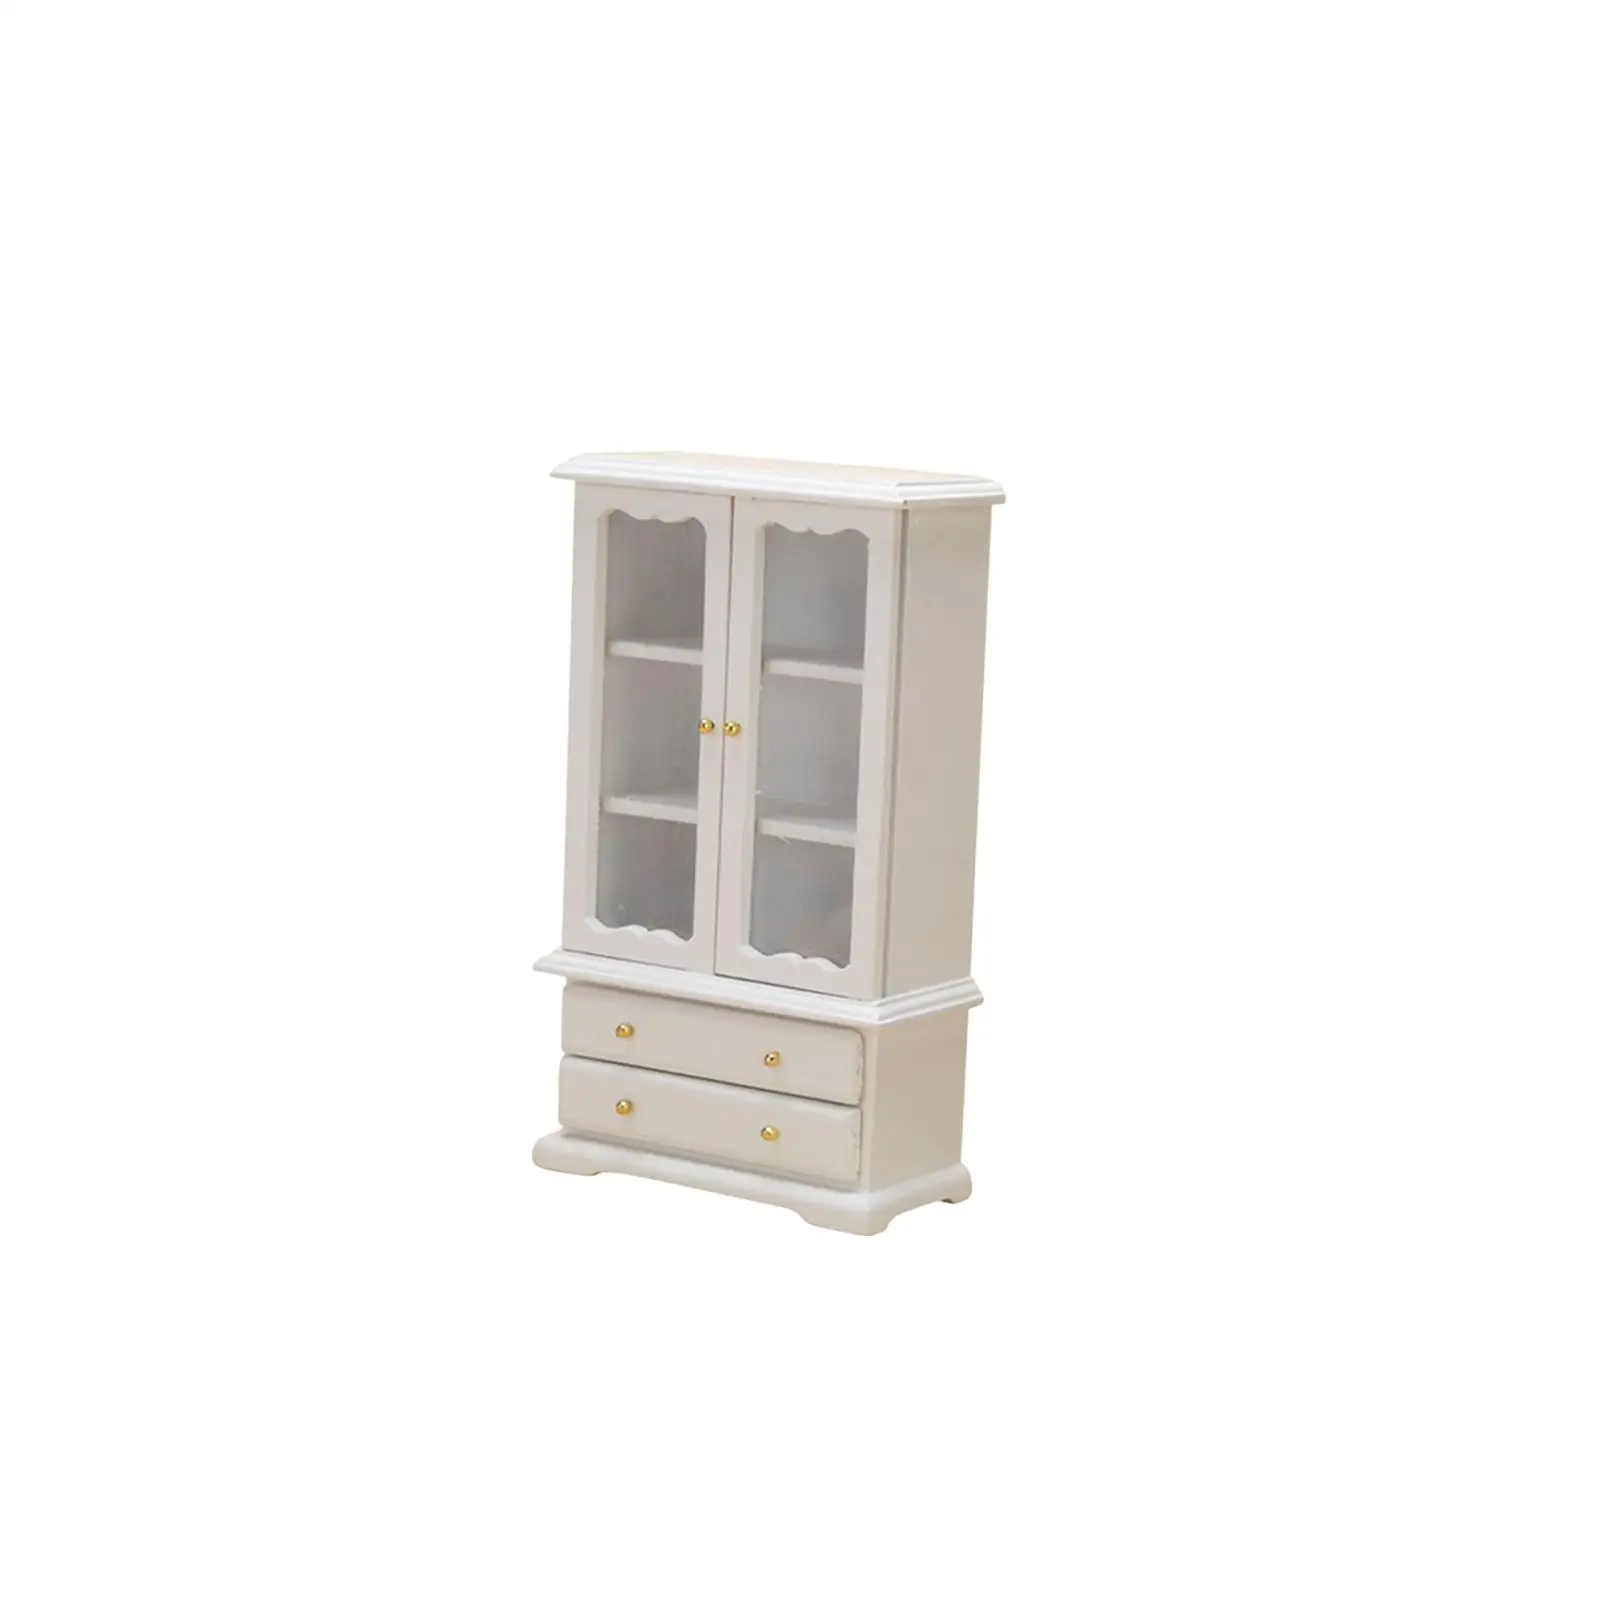 1:12 Dollhouse Book Shelving with Drawers Model Wooden.7x3.7x15cm